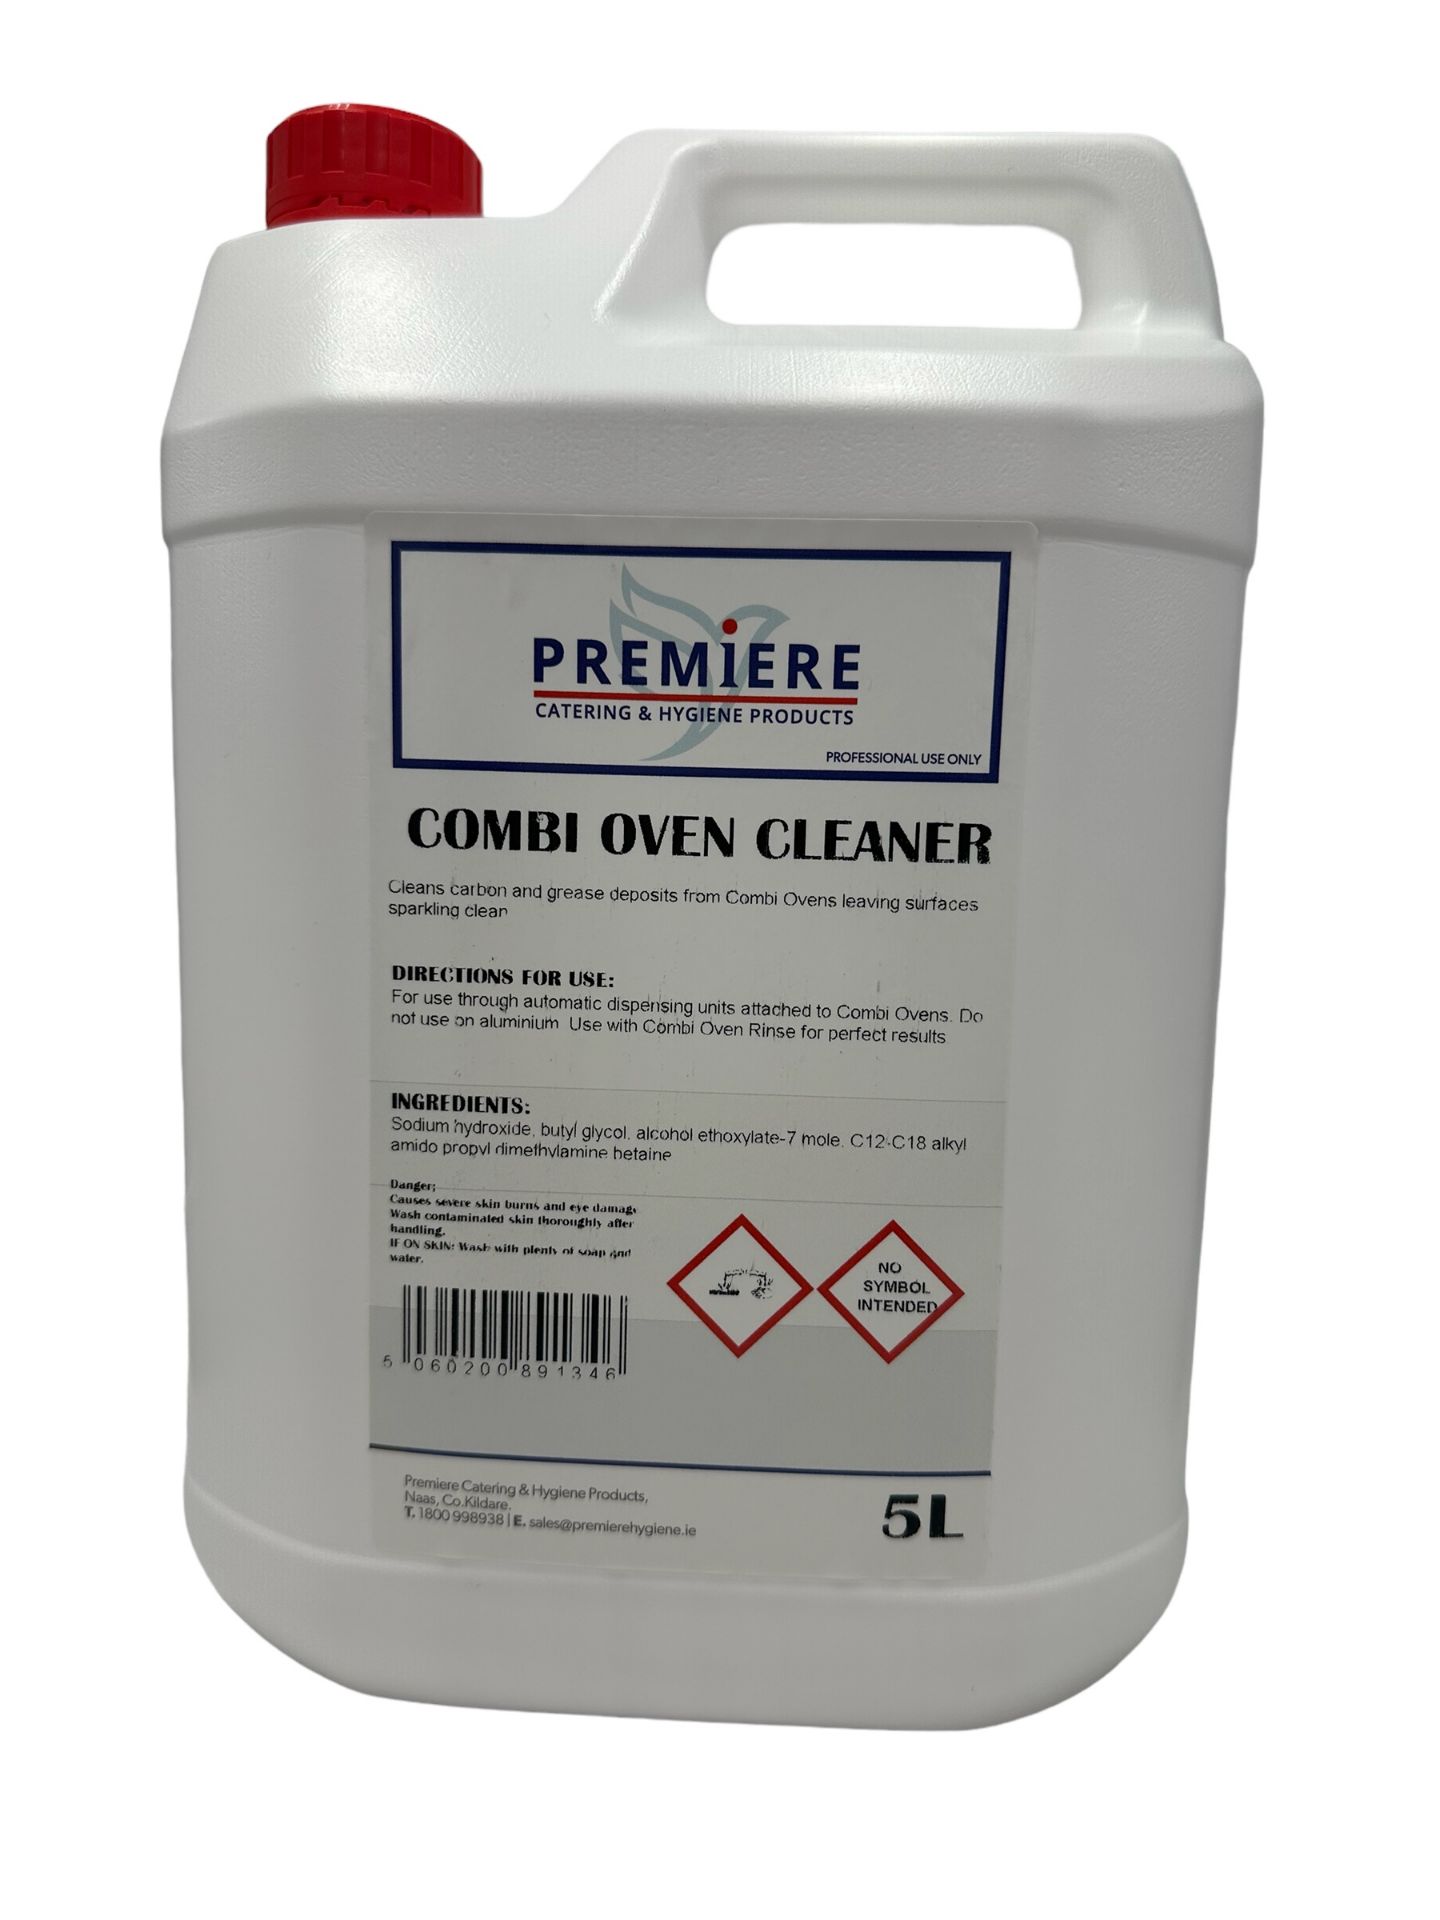 Picture of Combi Oven Cleaner, 5L.